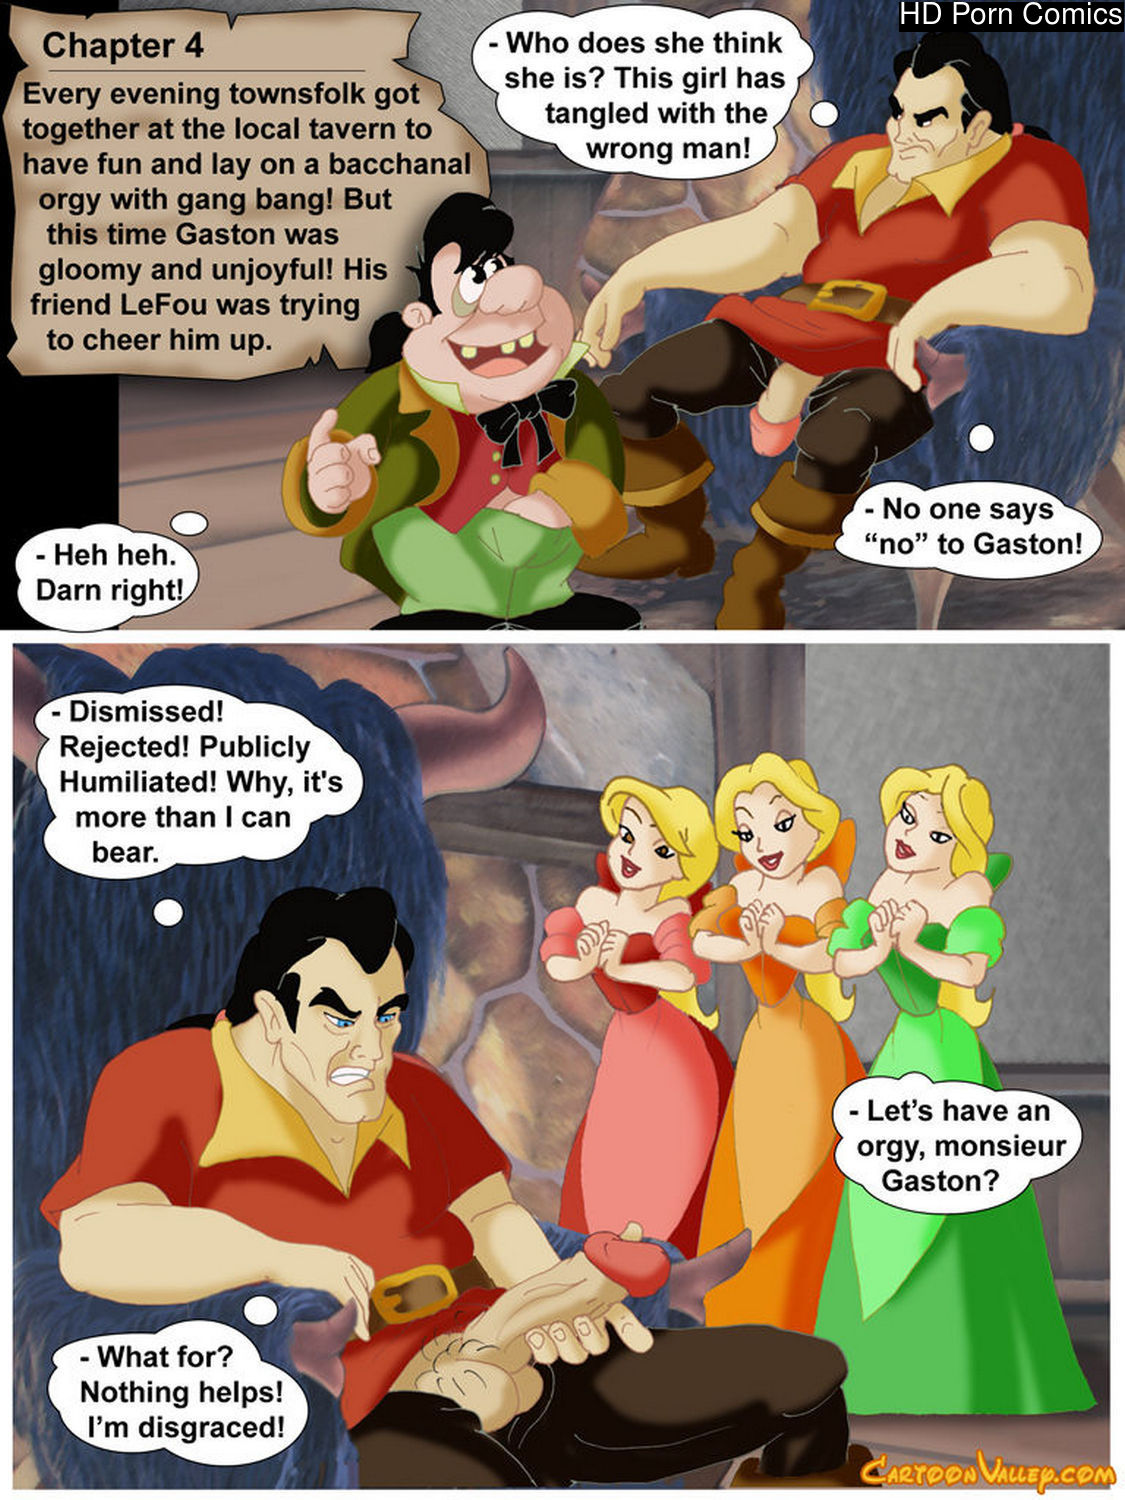 Beauty and the beast porn comic